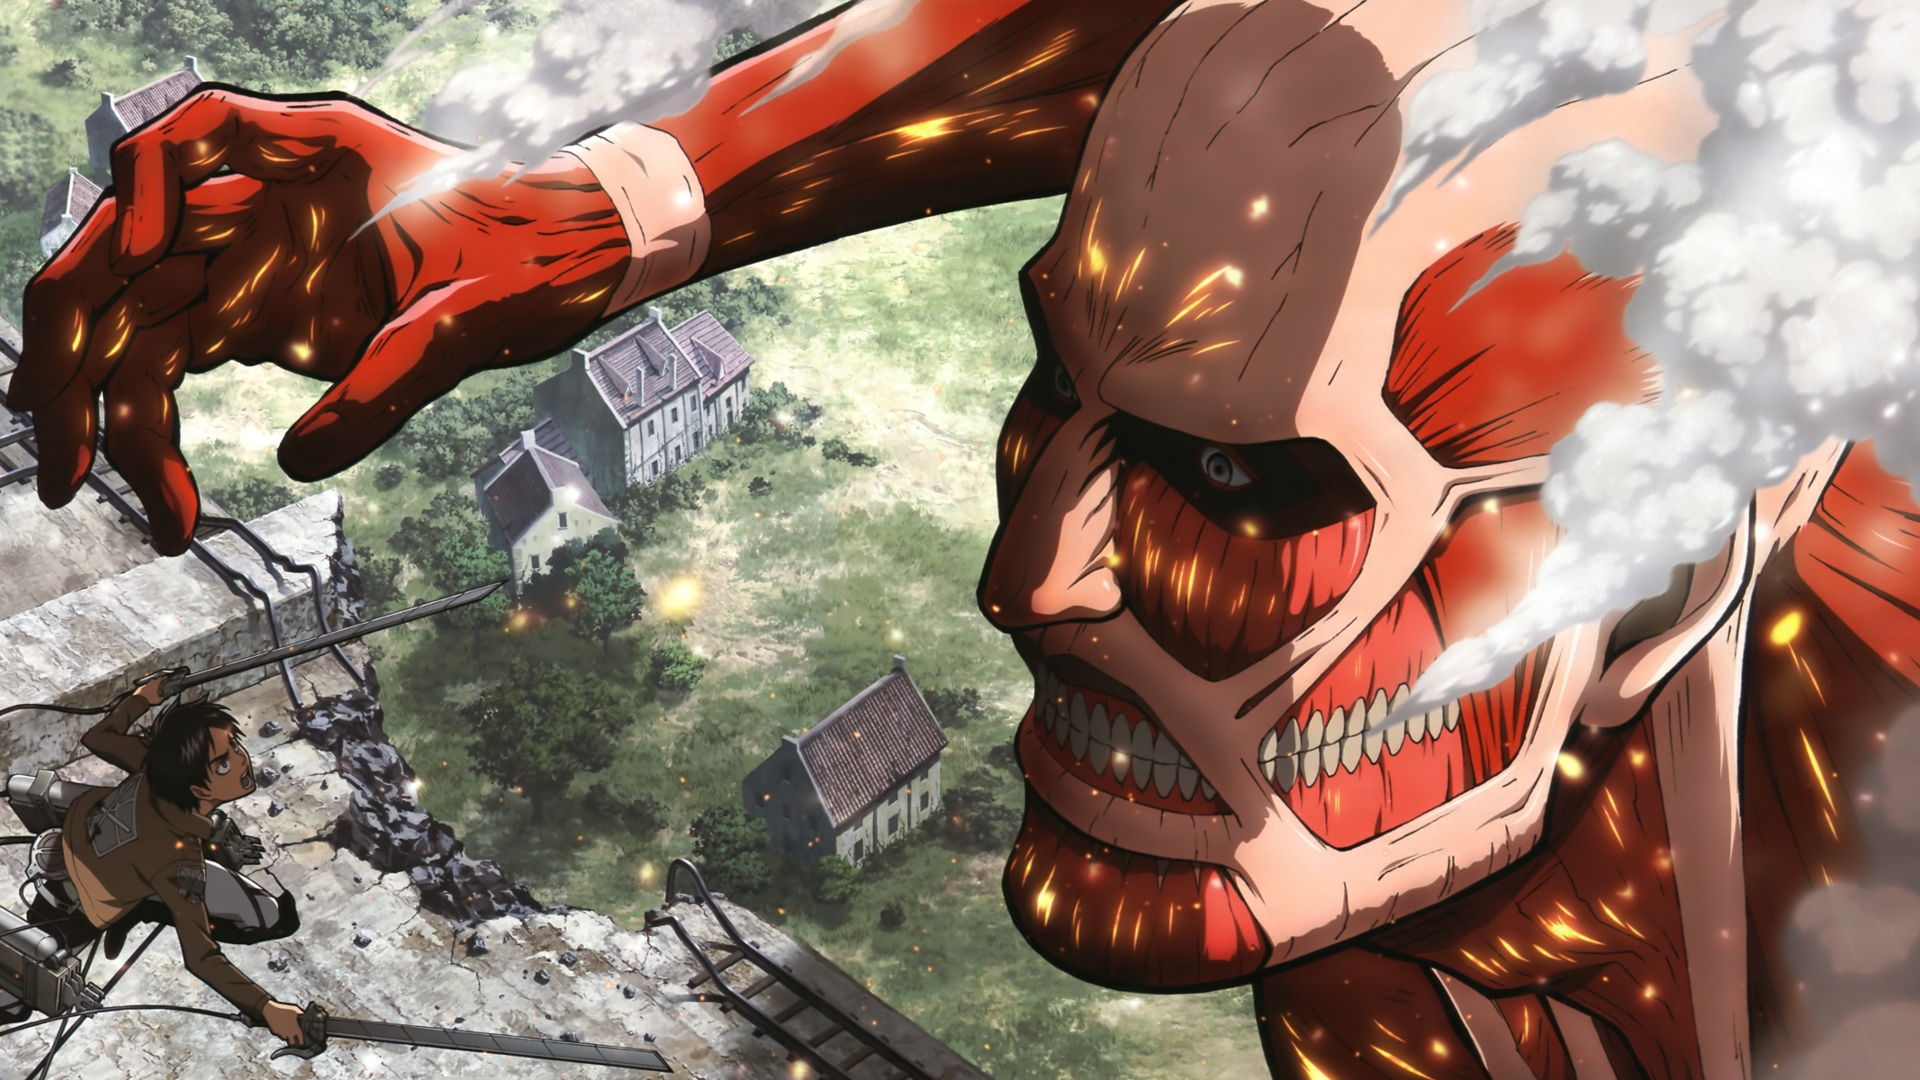 attack on titan, anime, colossal titan, eren yeager images